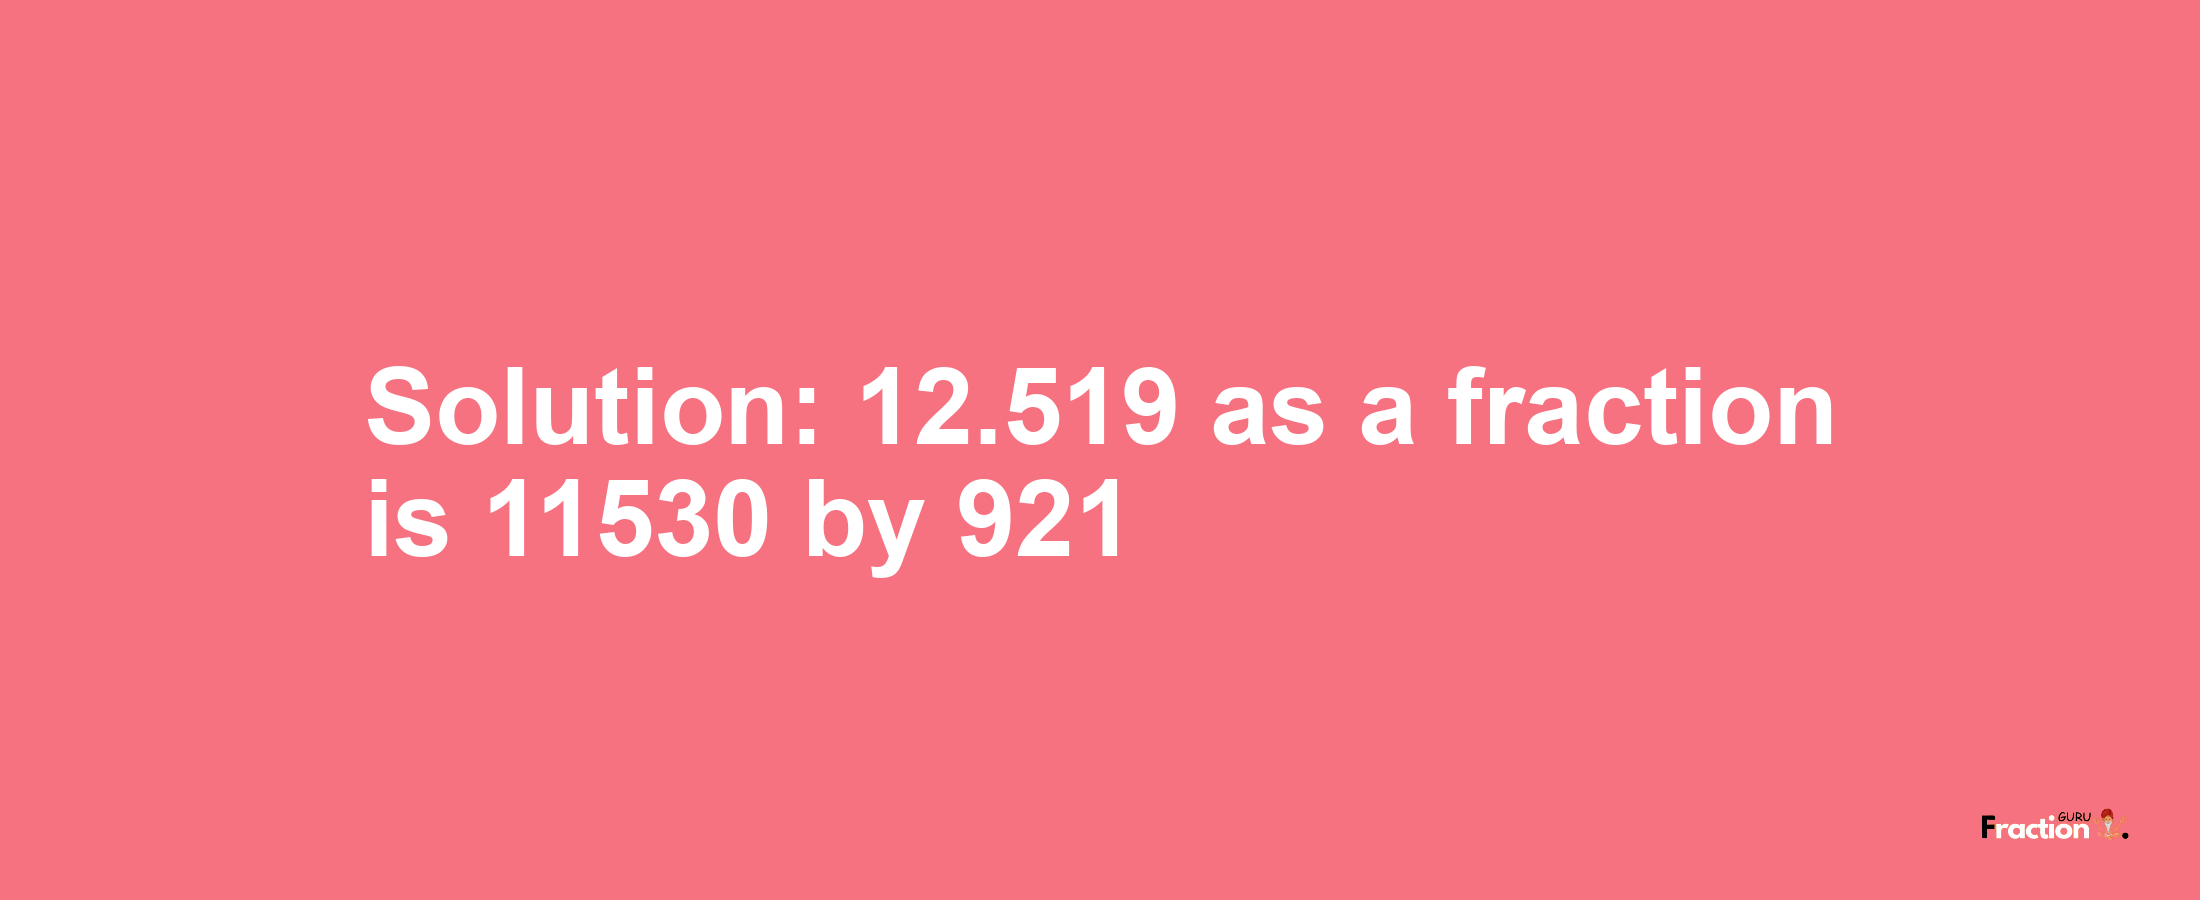 Solution:12.519 as a fraction is 11530/921